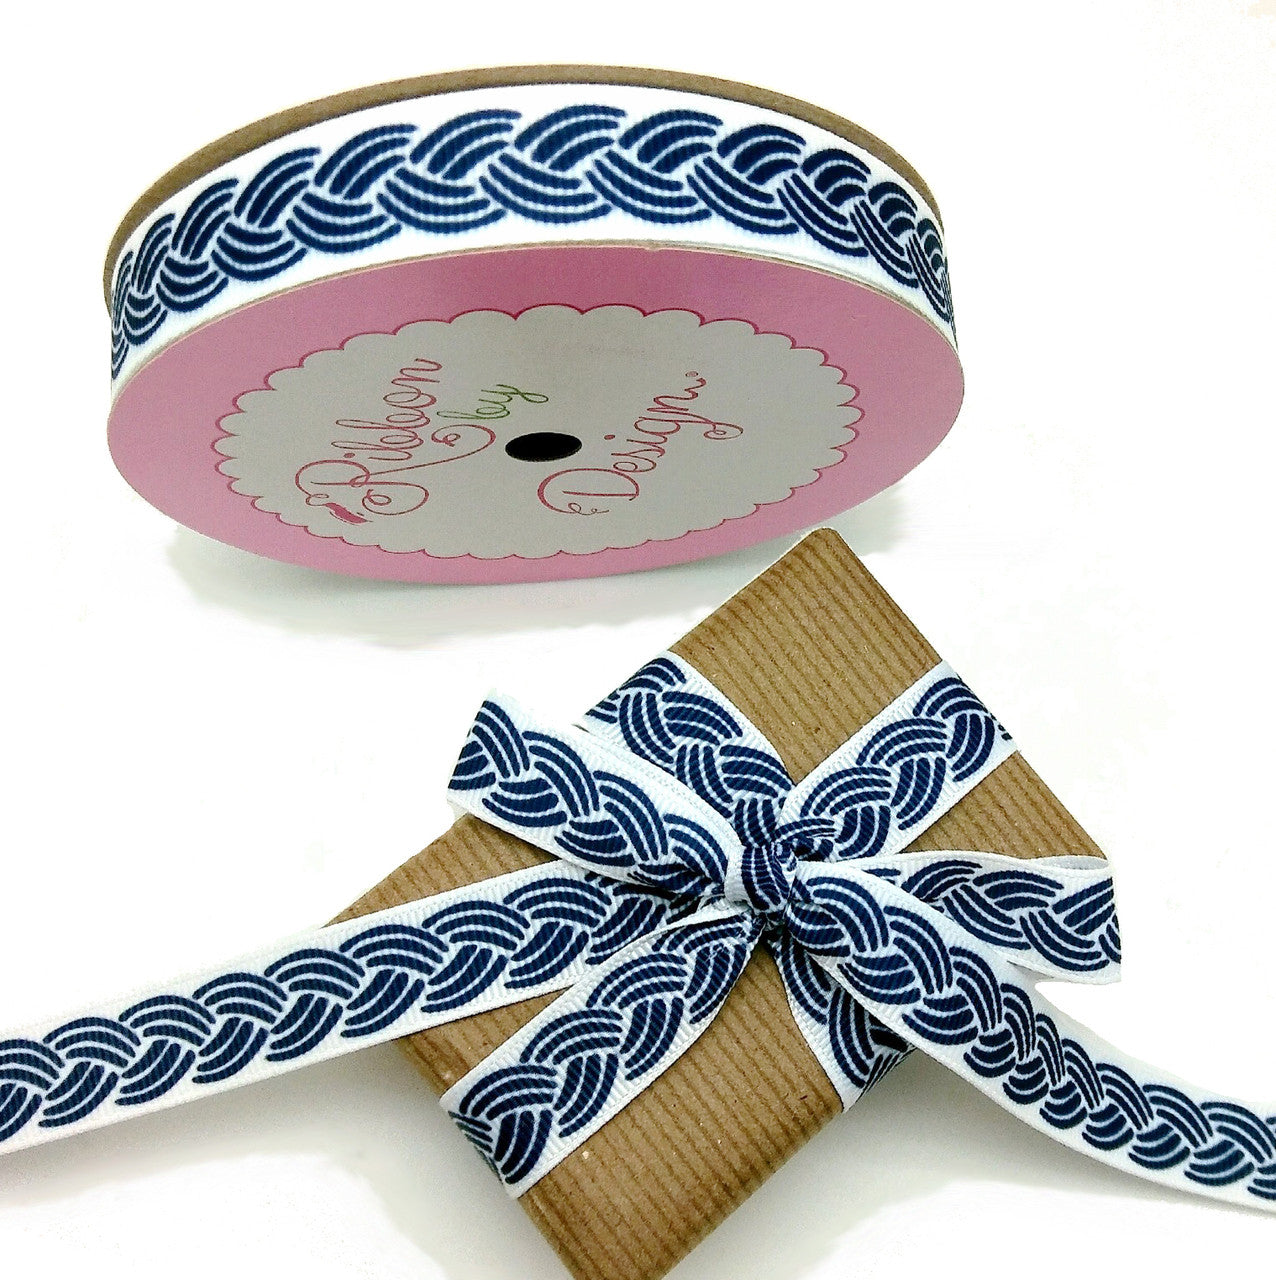 Tied on a plain brown wrapping, this bold ribbon makes a handsome presentation for a groomsman or Father's Day gift!